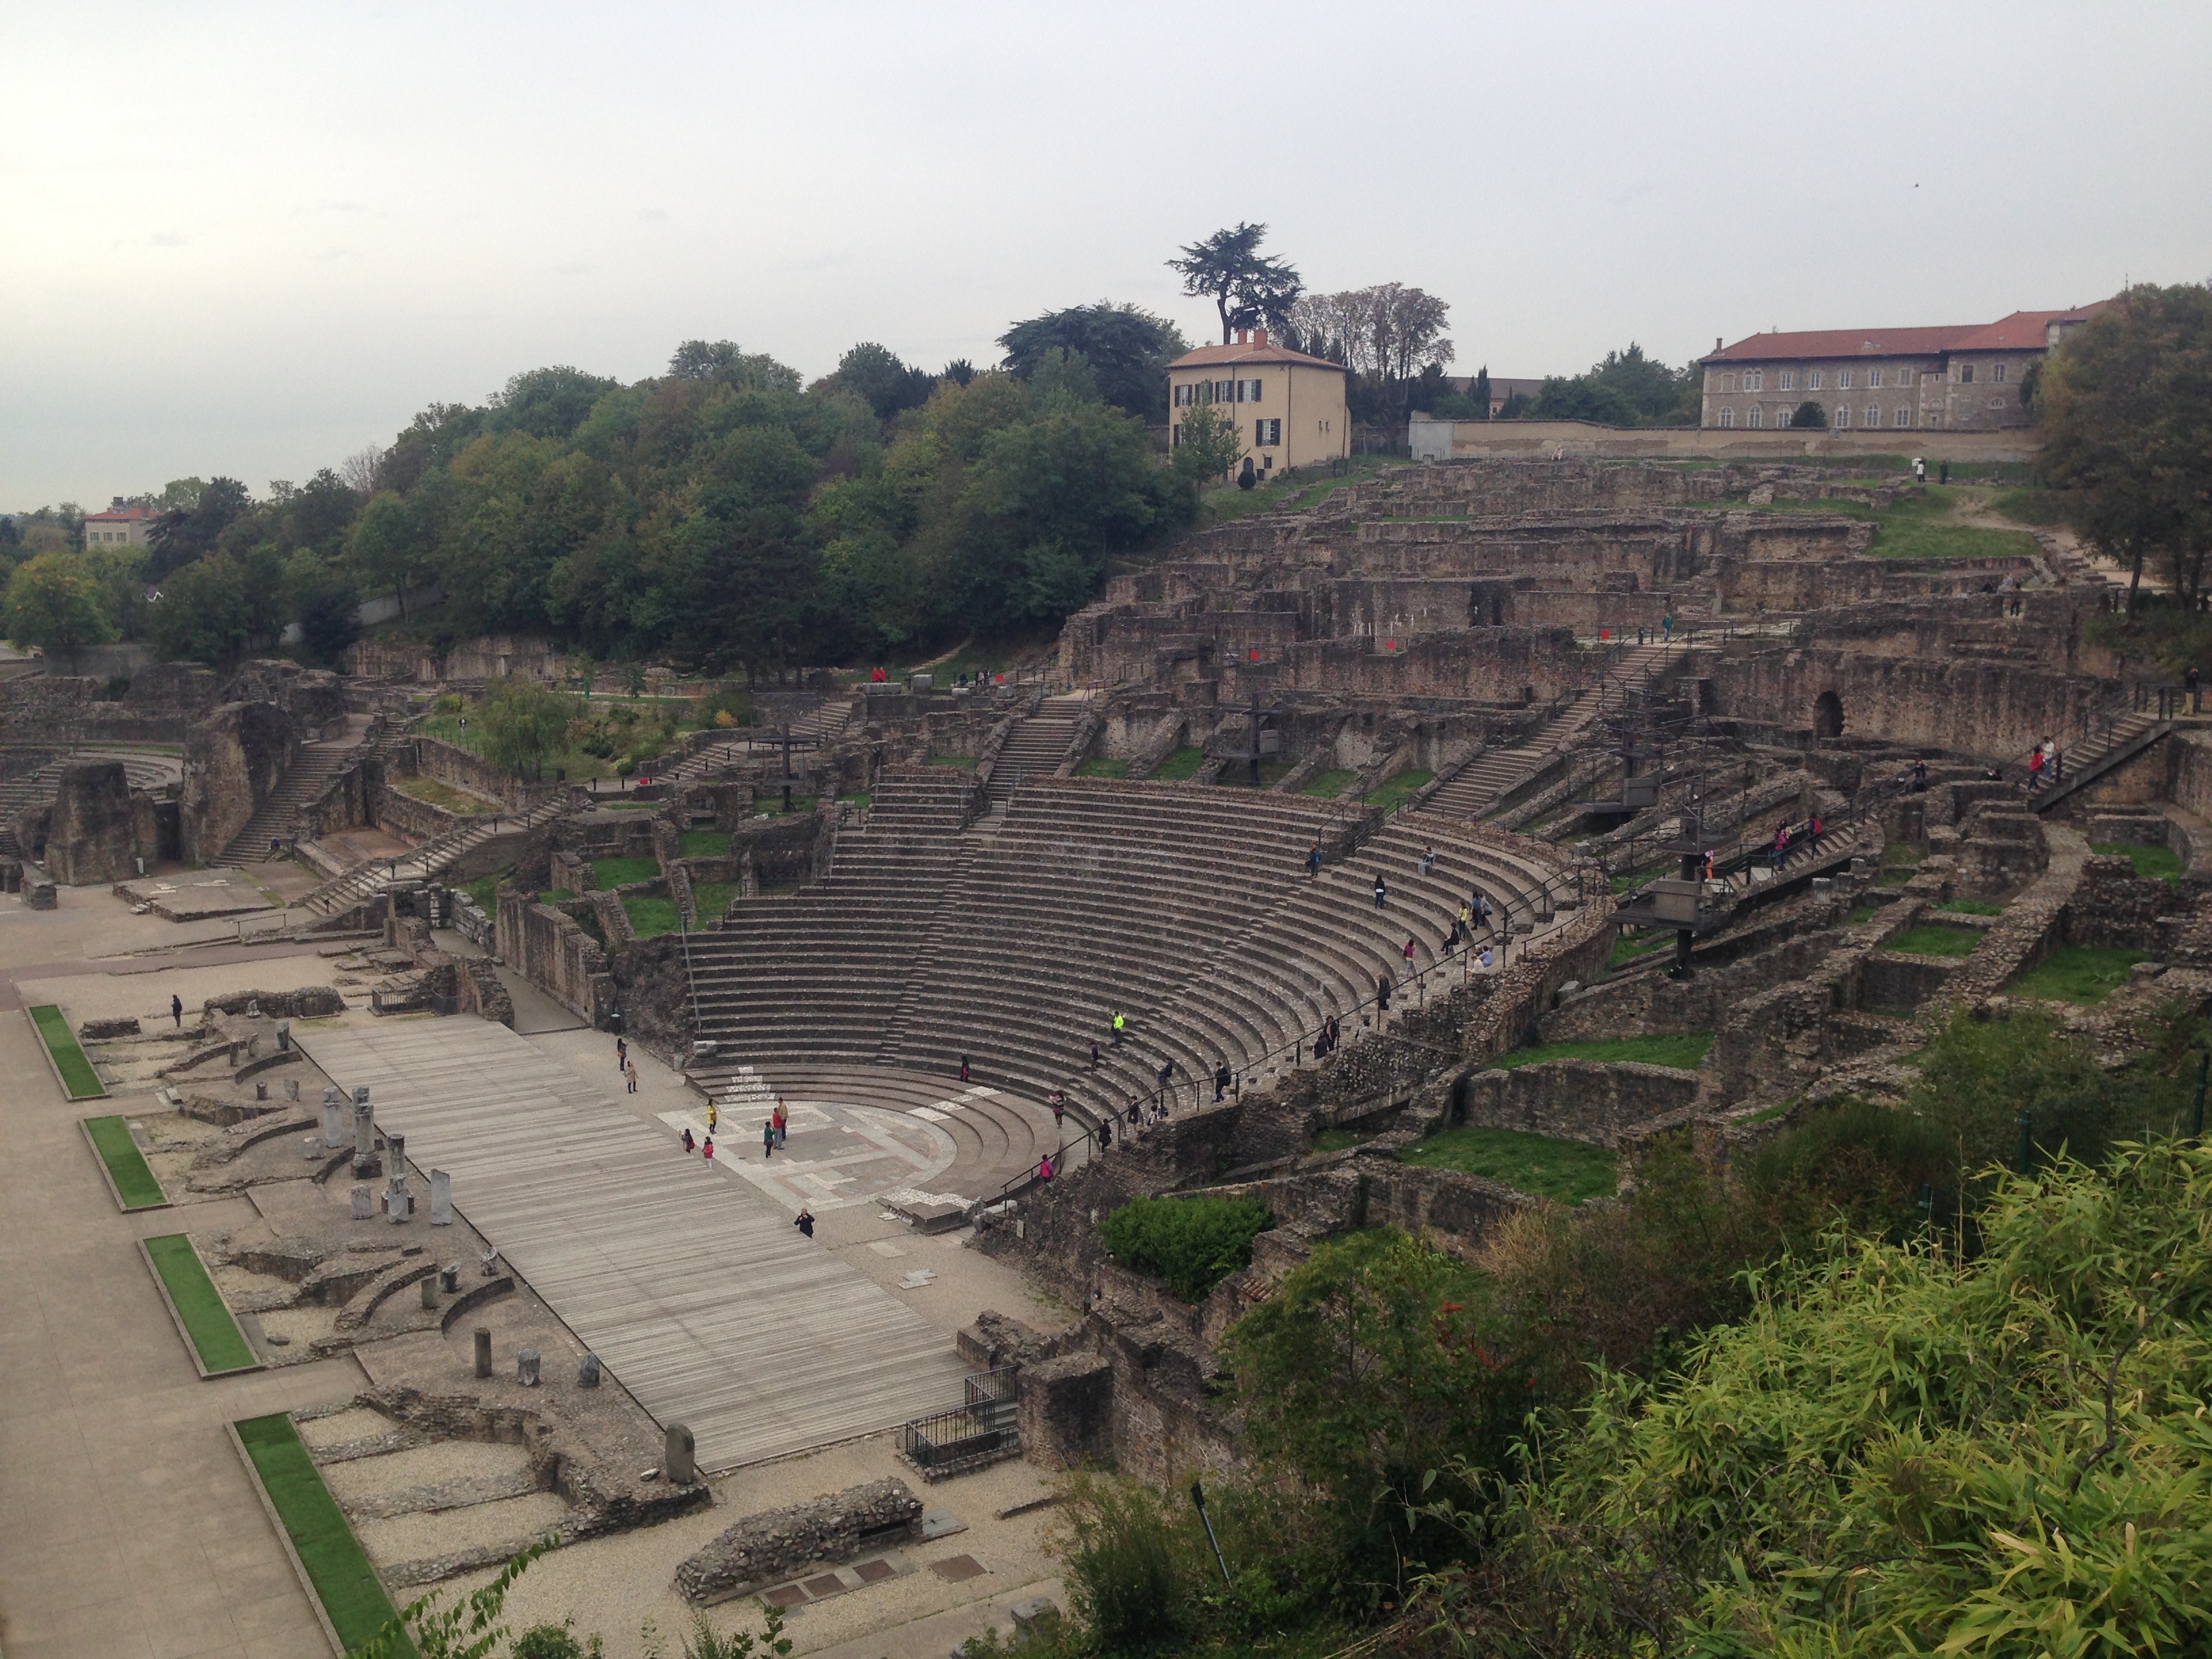 Theatres Romains, built around 15 BC by the Romans